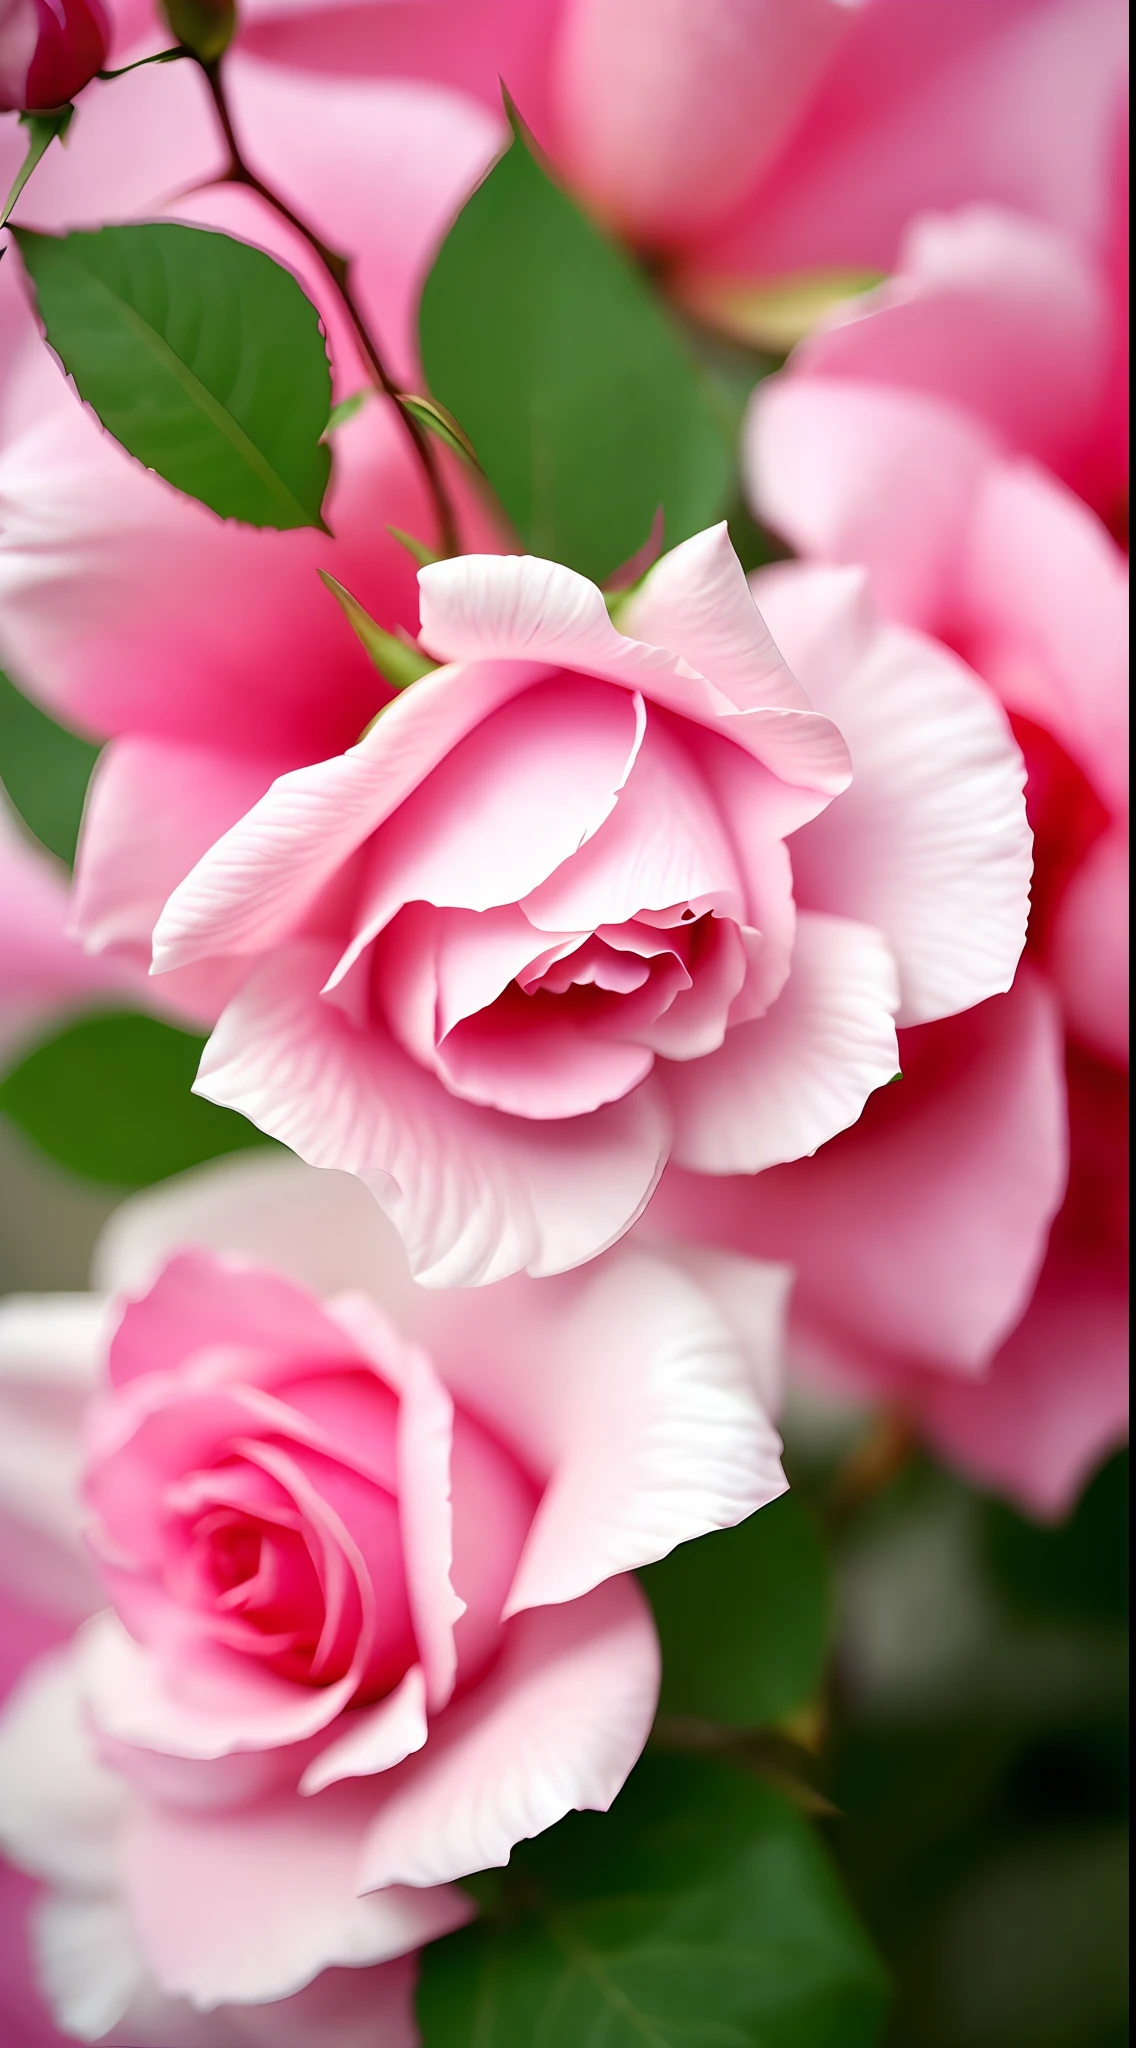 There are two pink roses that are in a vase - SeaArt AI